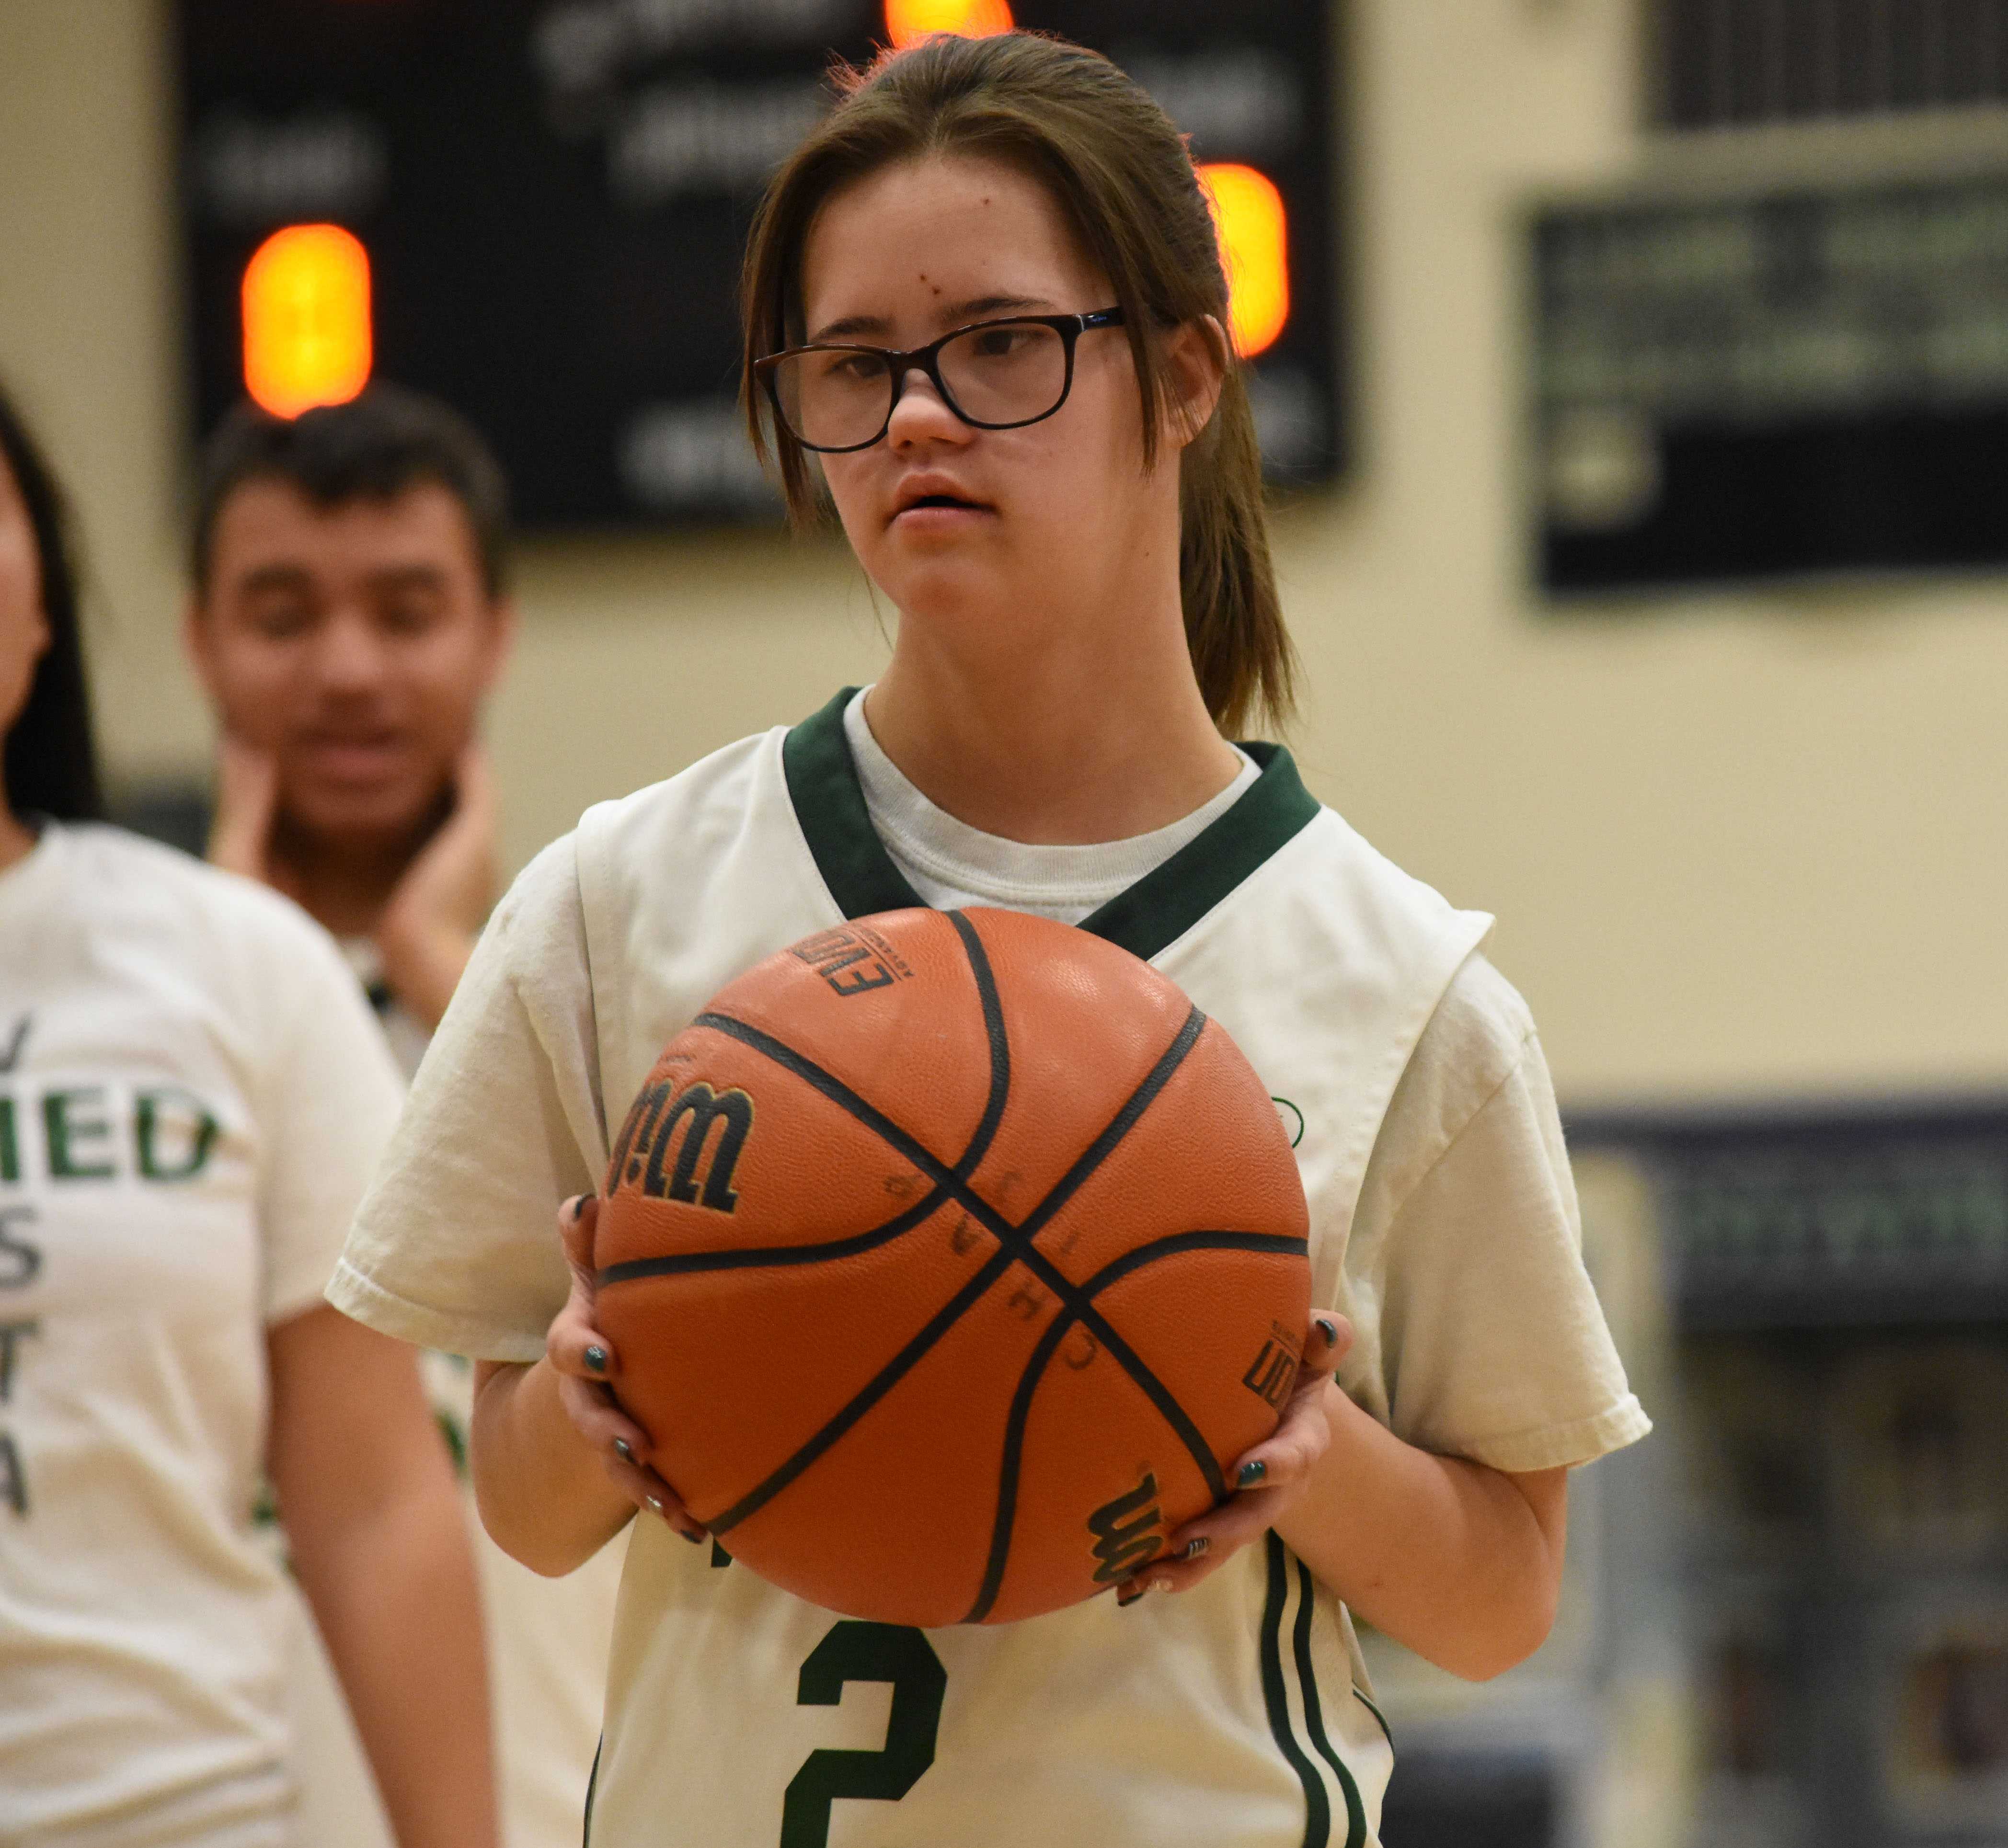 Unified+wraps+up+another+exciting+basketball+season